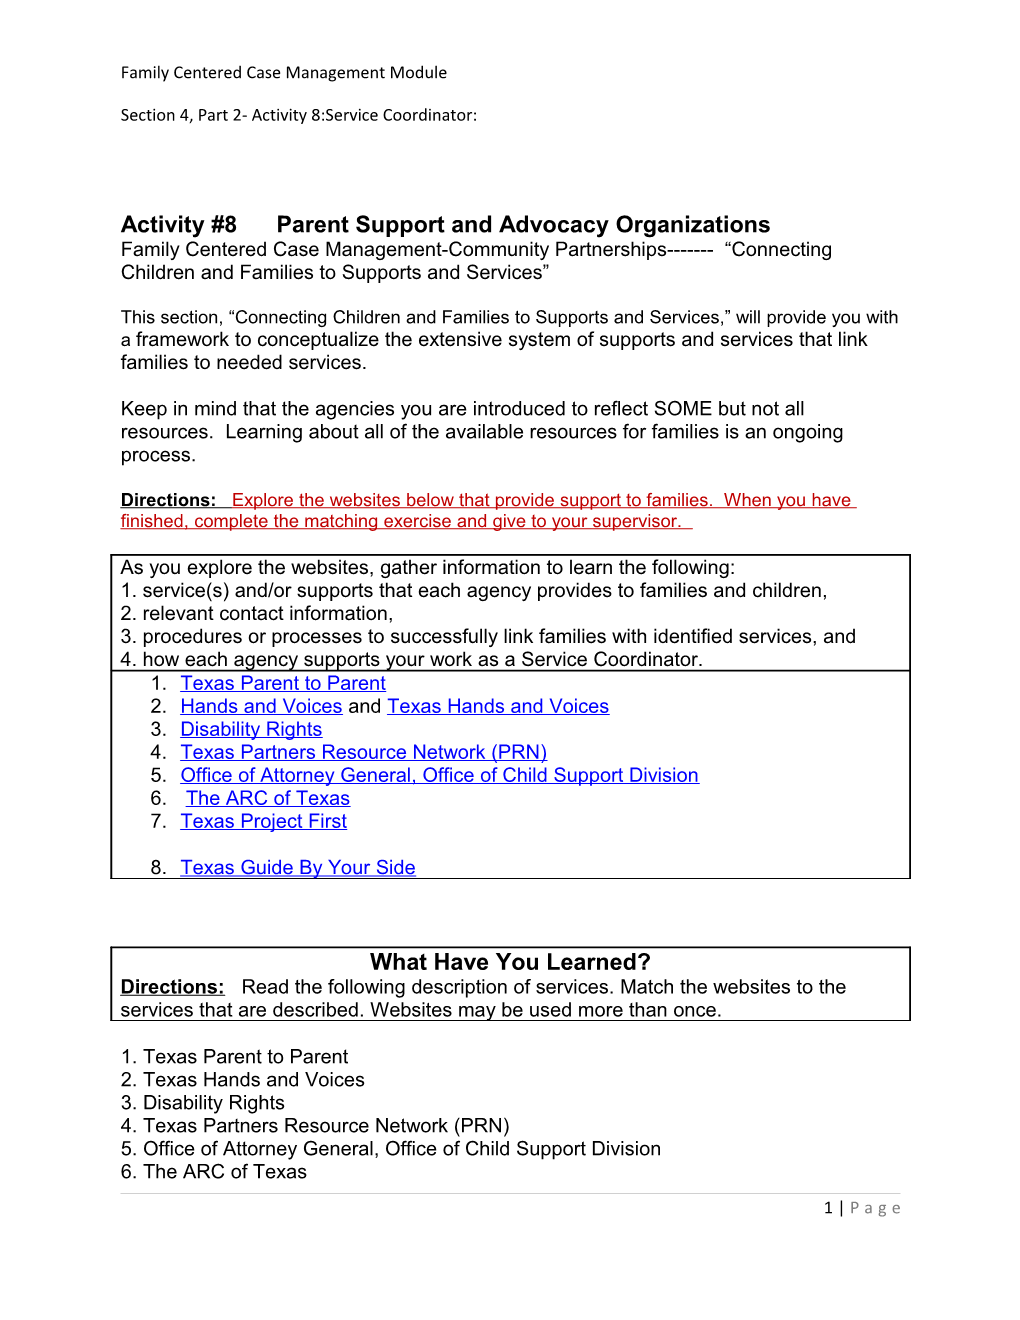 Activity #8 Parent Support and Advocacy Organizations